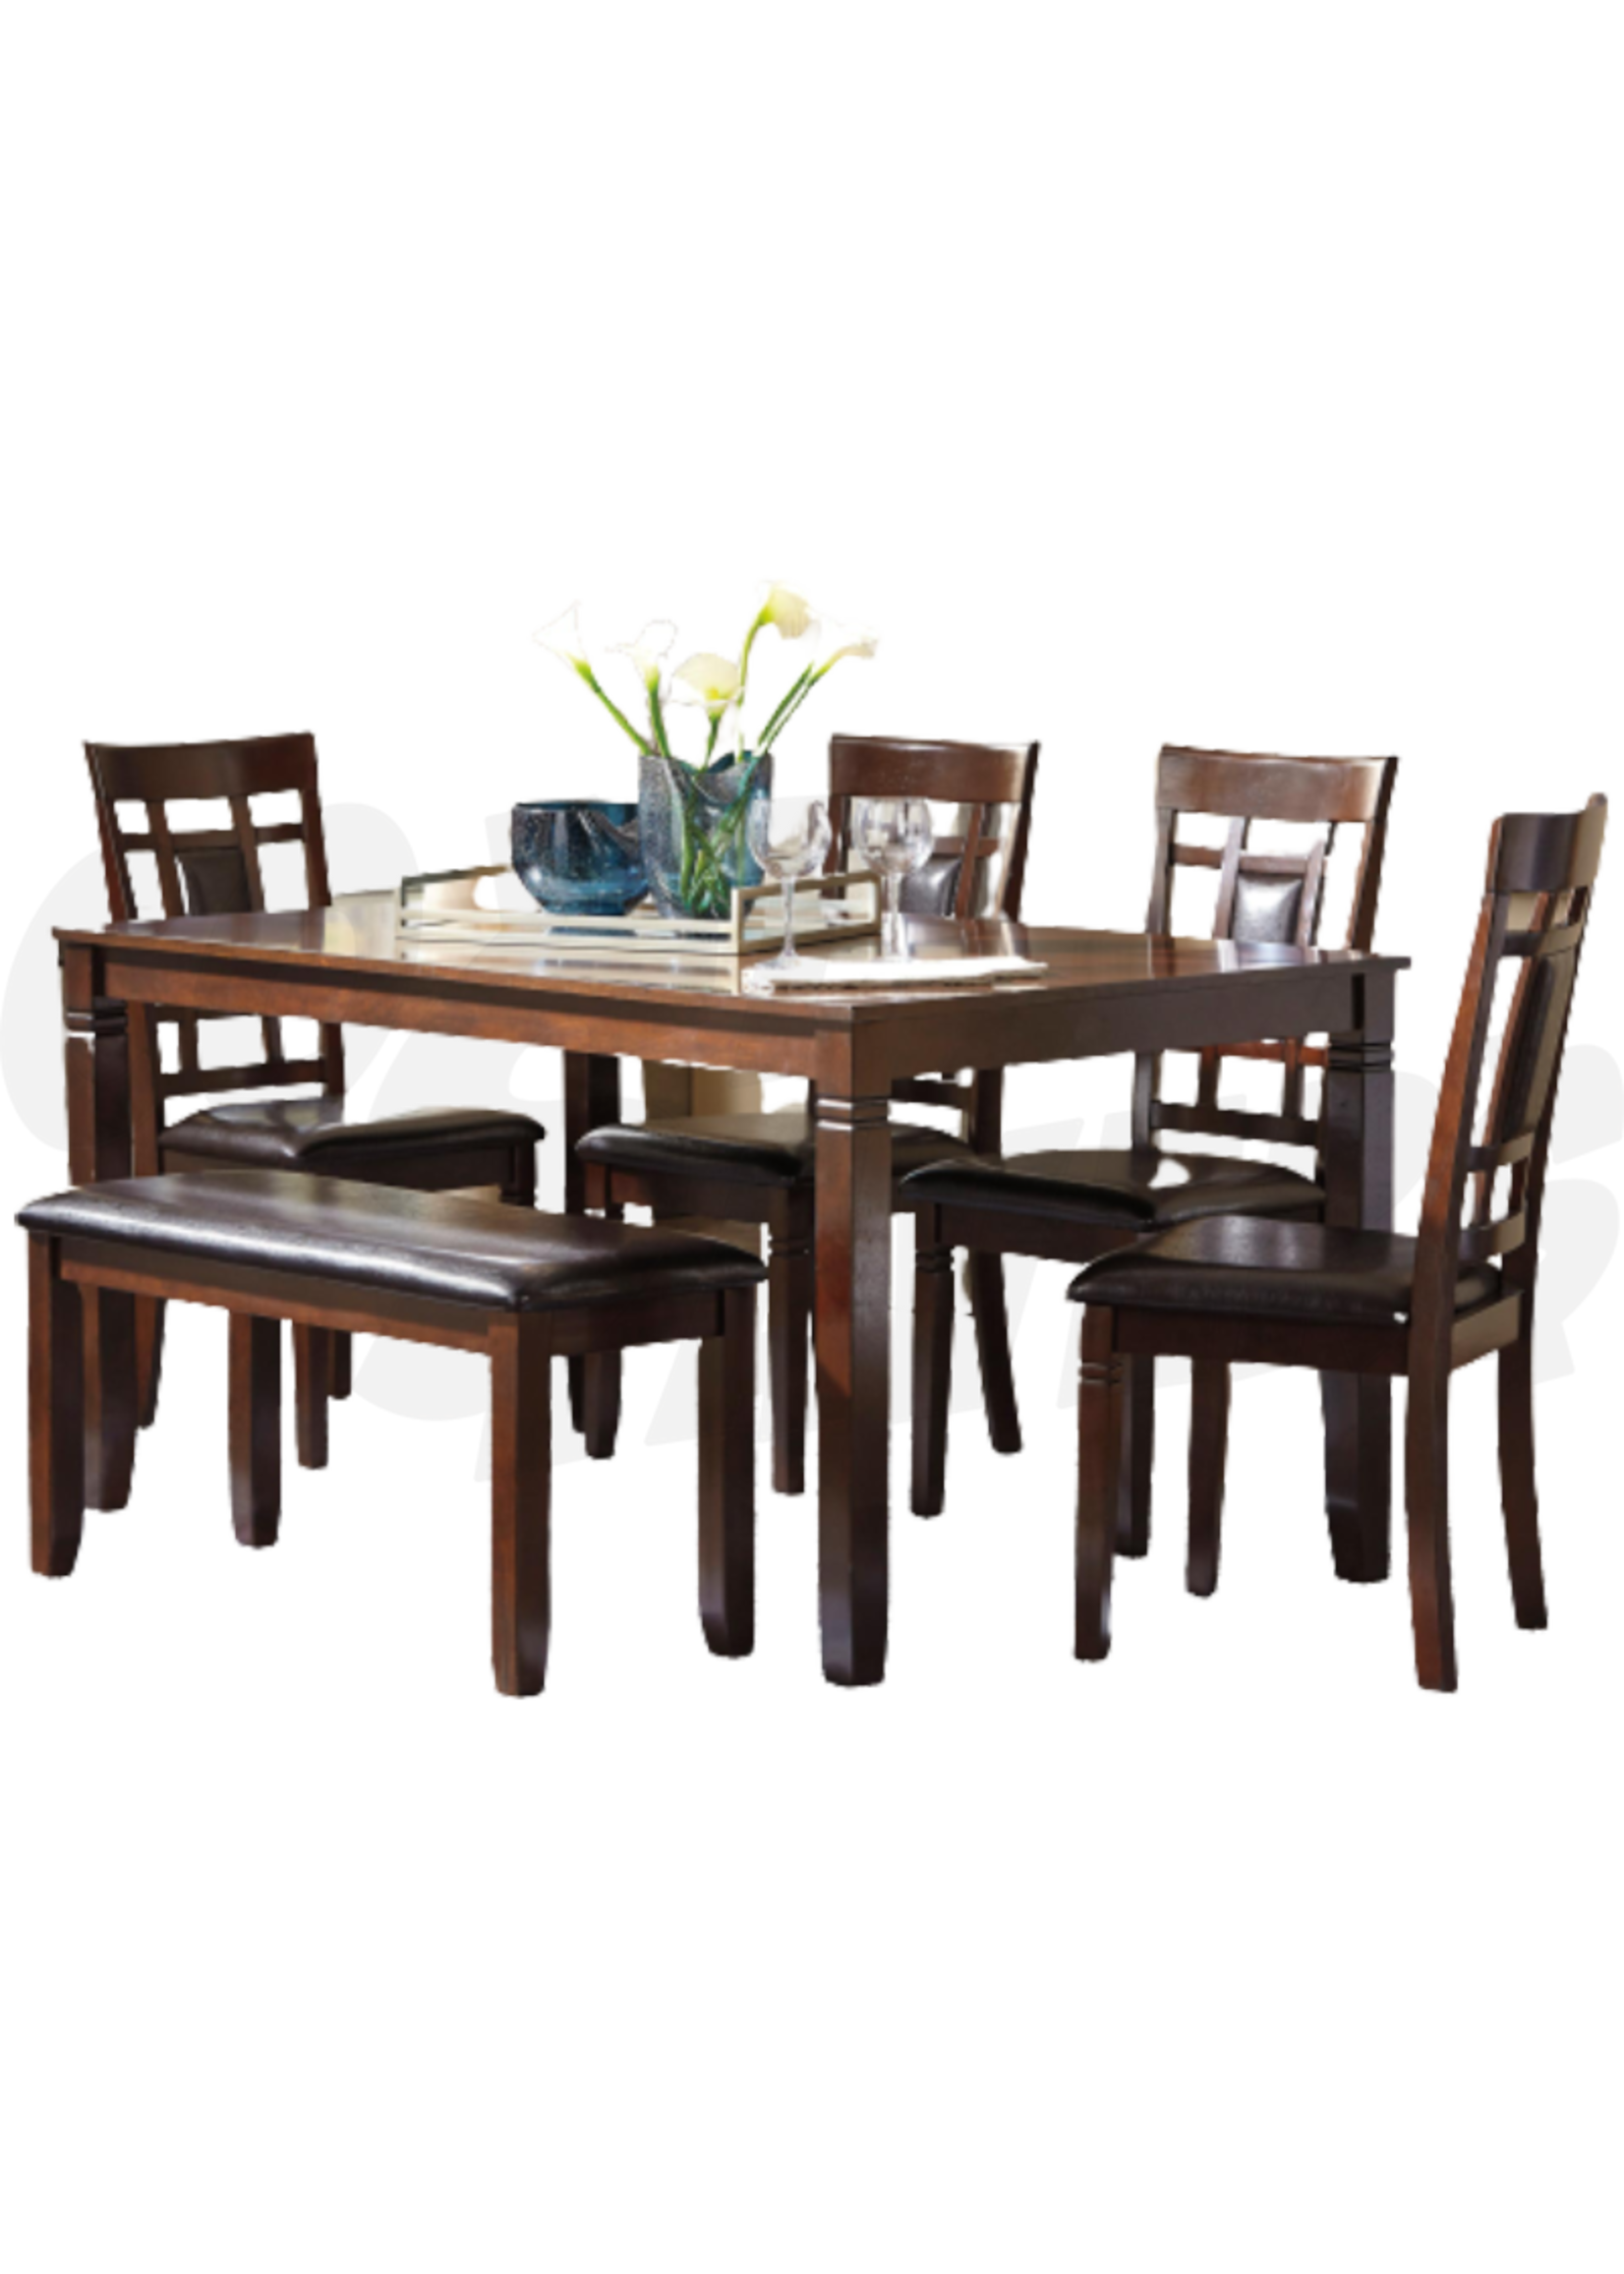 Signature Design Bennox 6pc Dining Set, Bennox Dining Room Table And Chairs With Bench Set Of 6